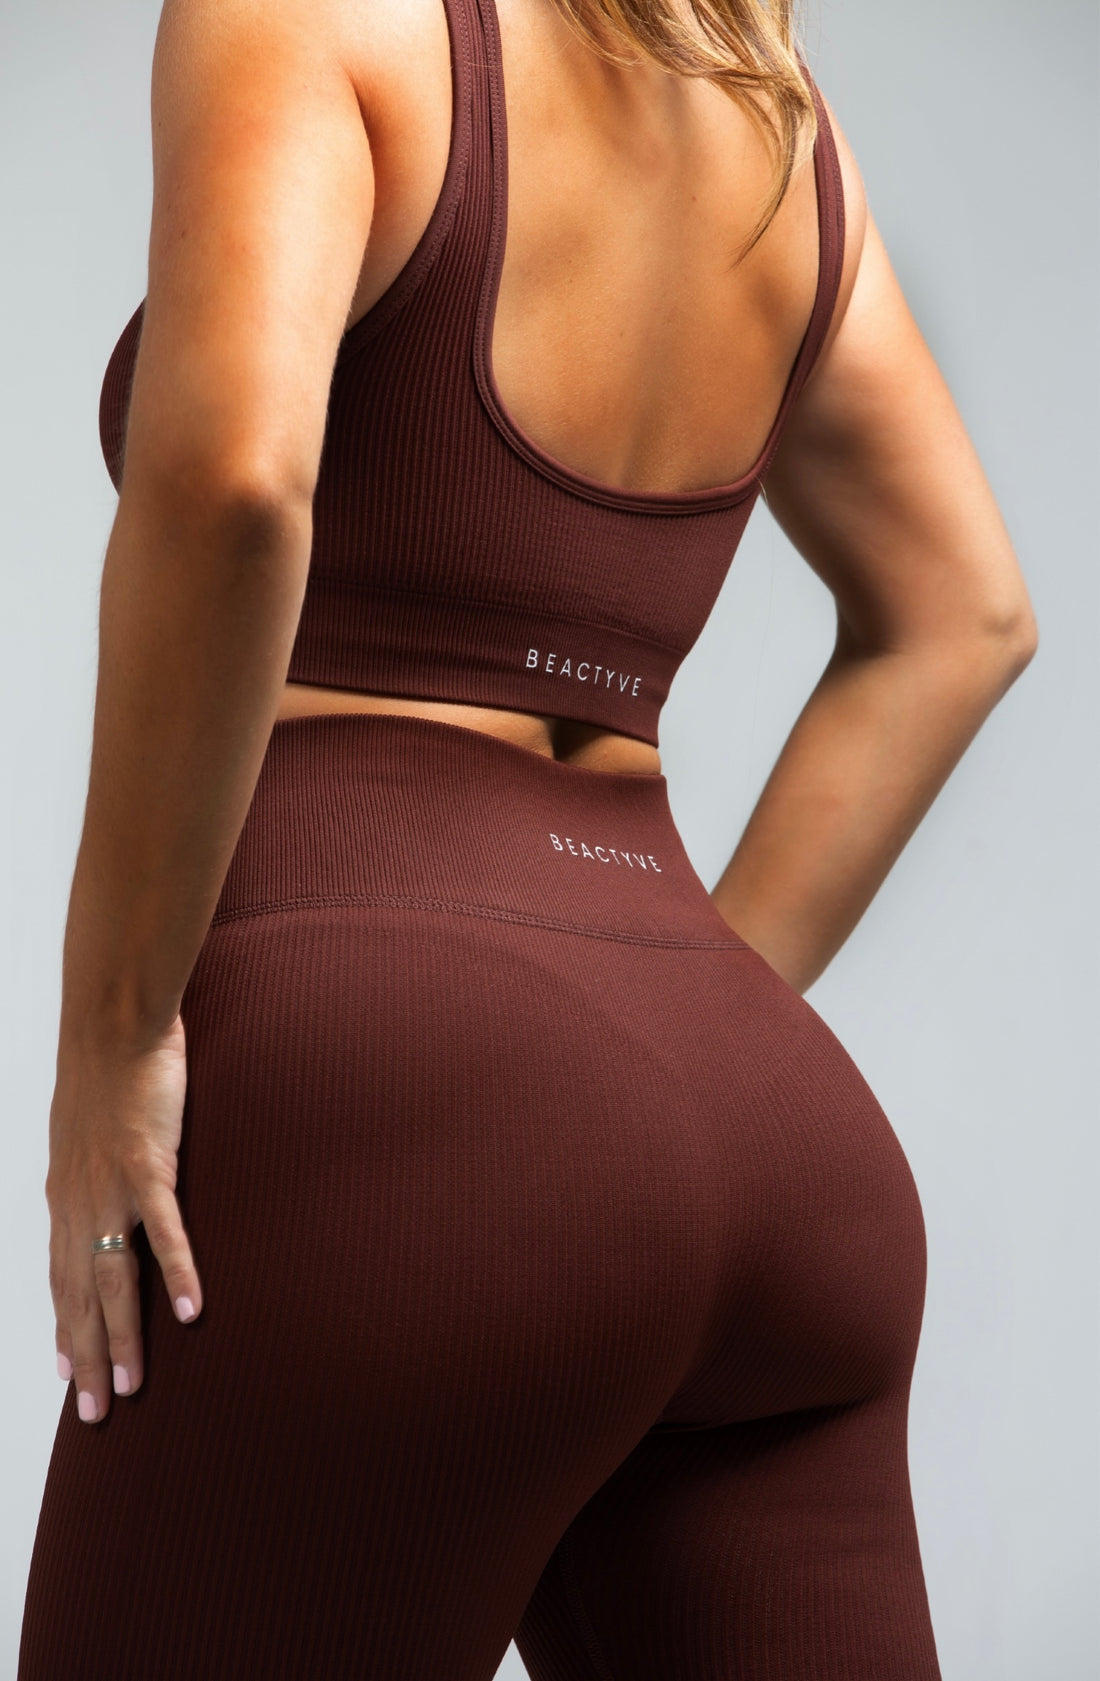 PrimeWolf - The Ribbed Leggings + Scoop Neck Sports Bra // The perfect  collection for in and out of the gym. Featured colours; Creamy White & Chocolate  Brown. #ribbed #leggings